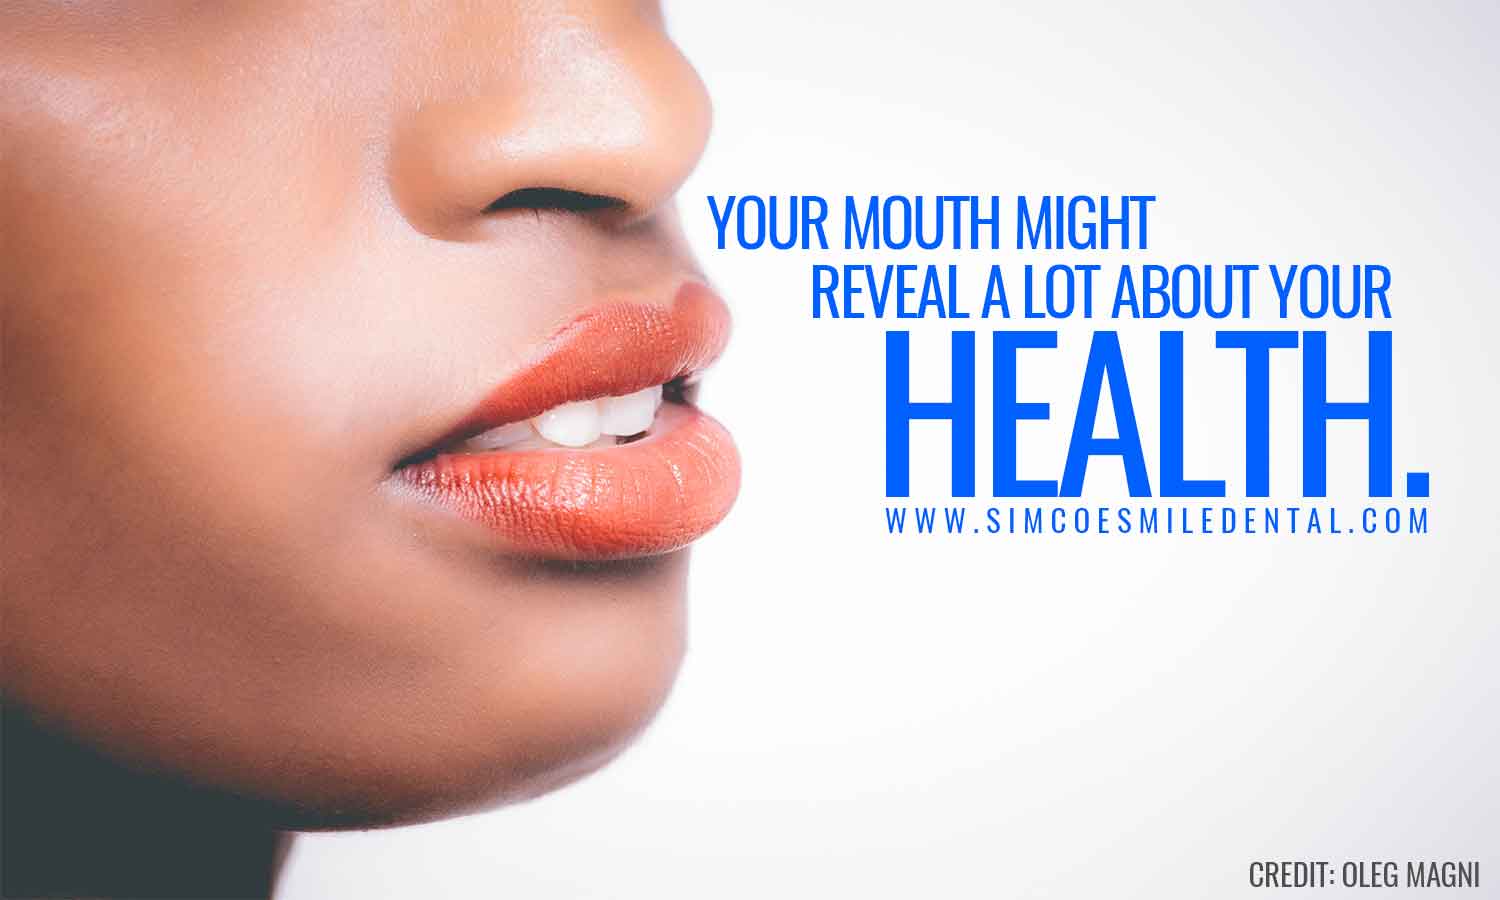 Your mouth might reveal a lot about your health